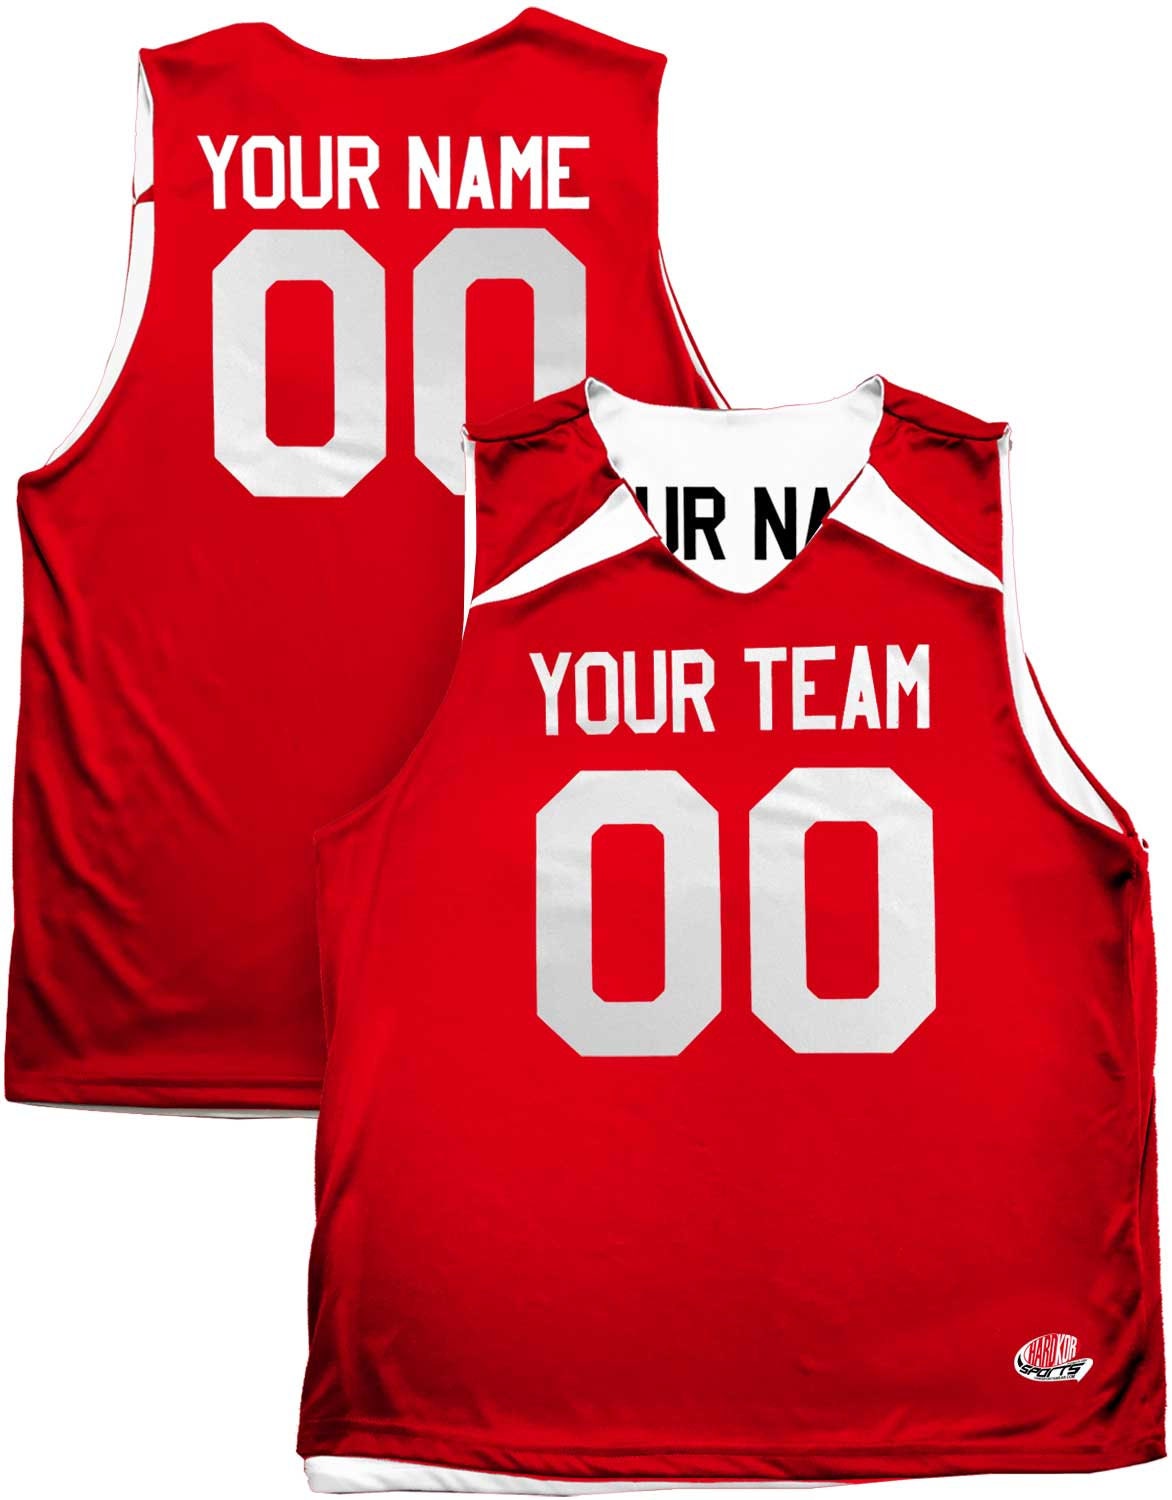 Red White and Blue Reversible Custom Basketball Uniform | Lightweight Shoulder Wedge Jersey with Team Name, Player Name and Numbers